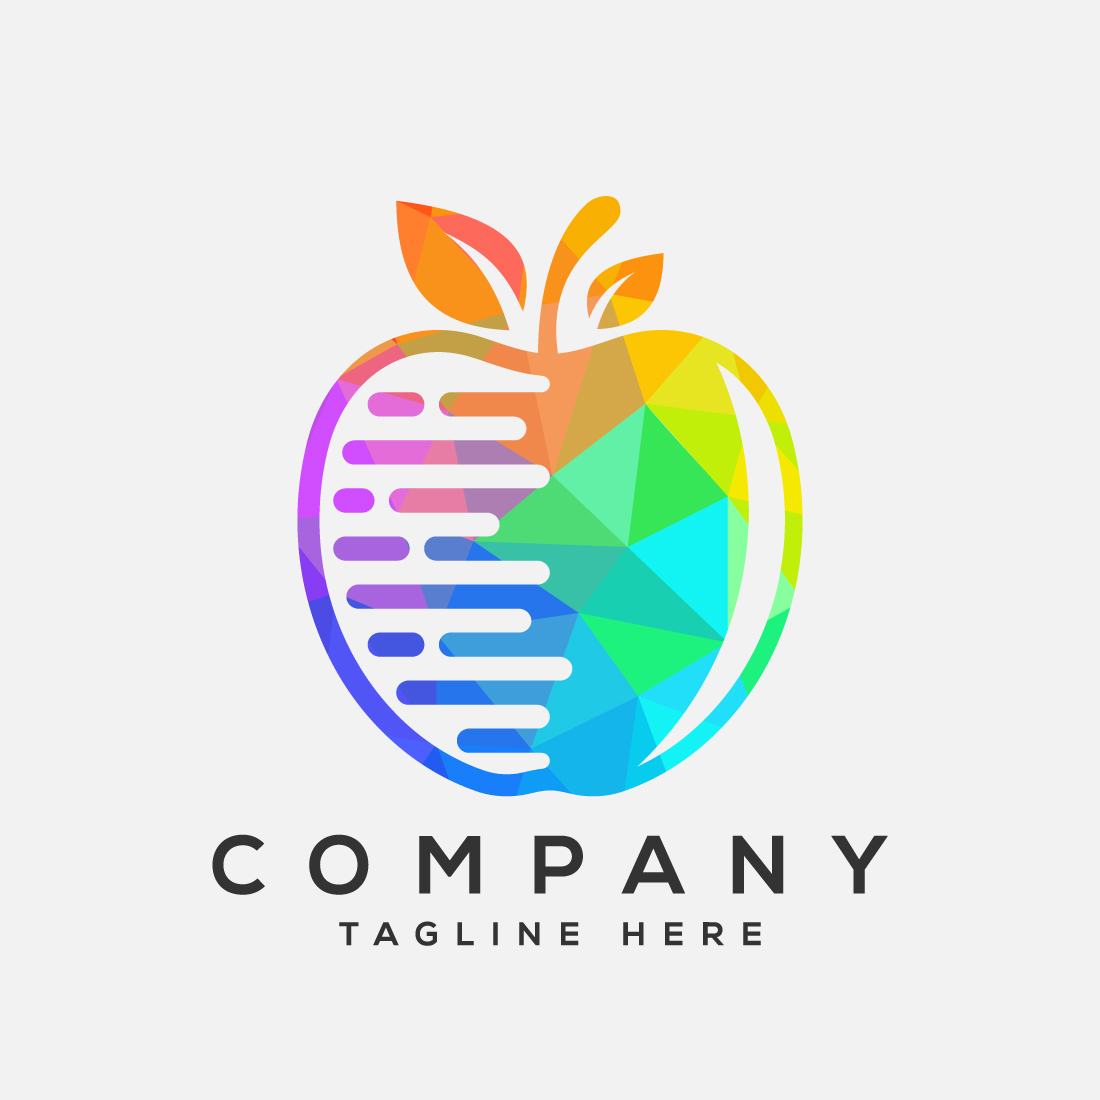 Low poly style apple technology logo sign symbol in flat style preview image.